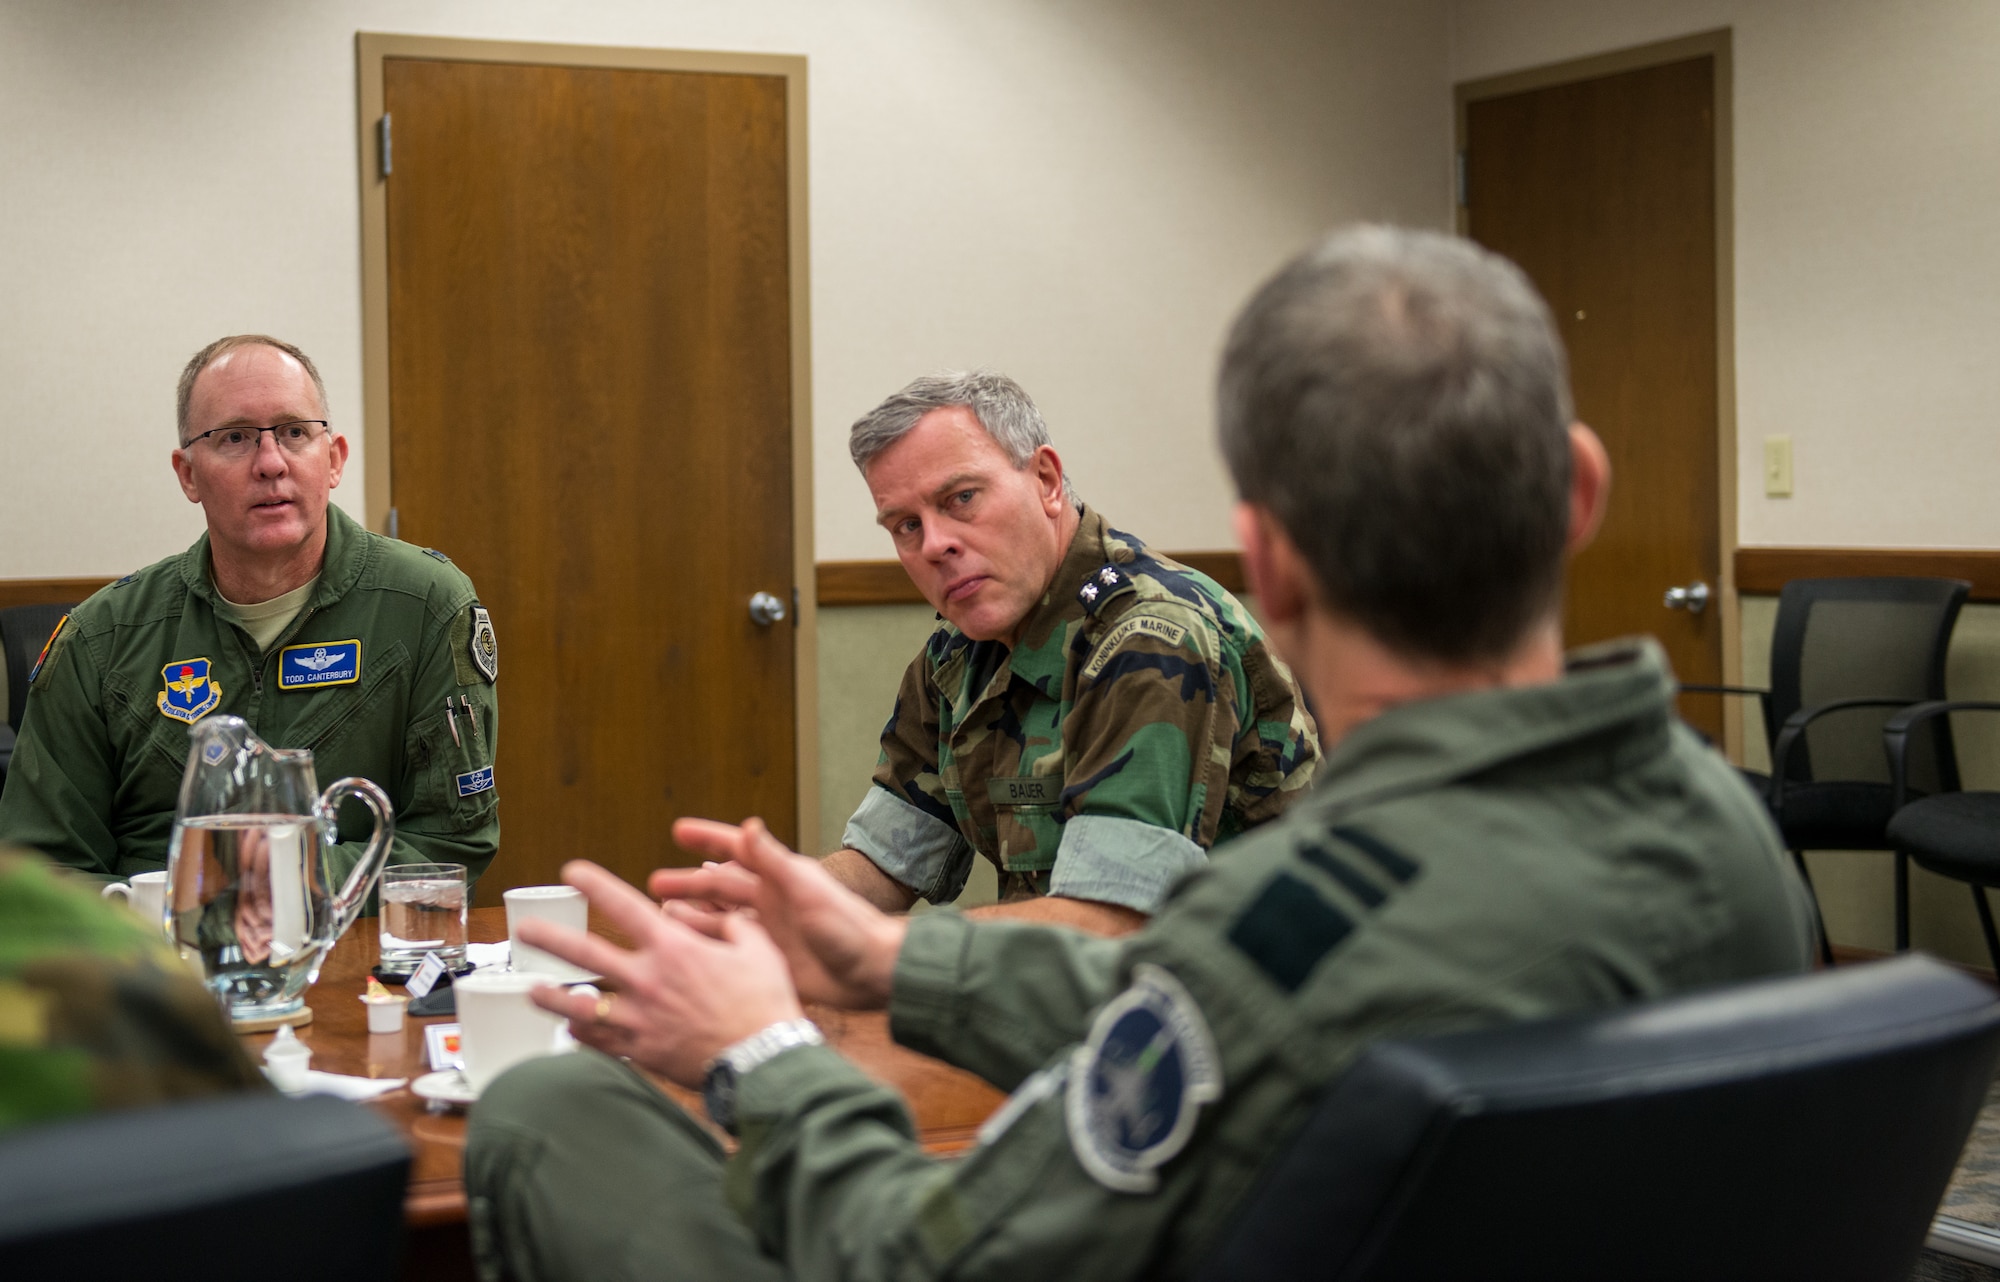 Netherlands Chief of Defense, Lieutenant Admiral Rob Bauer, receives a mission brief from 56th Fighter Wing leadership at Luke Air Force Base Ariz. Jan 30, 2019. Brig. Gen. Todd Canterbury discussed the wing’s F-35A training mission and the various partnerships that Luke AFB has. (U.S Air Force photo by Airman 1st Class Jacob Wongwai)